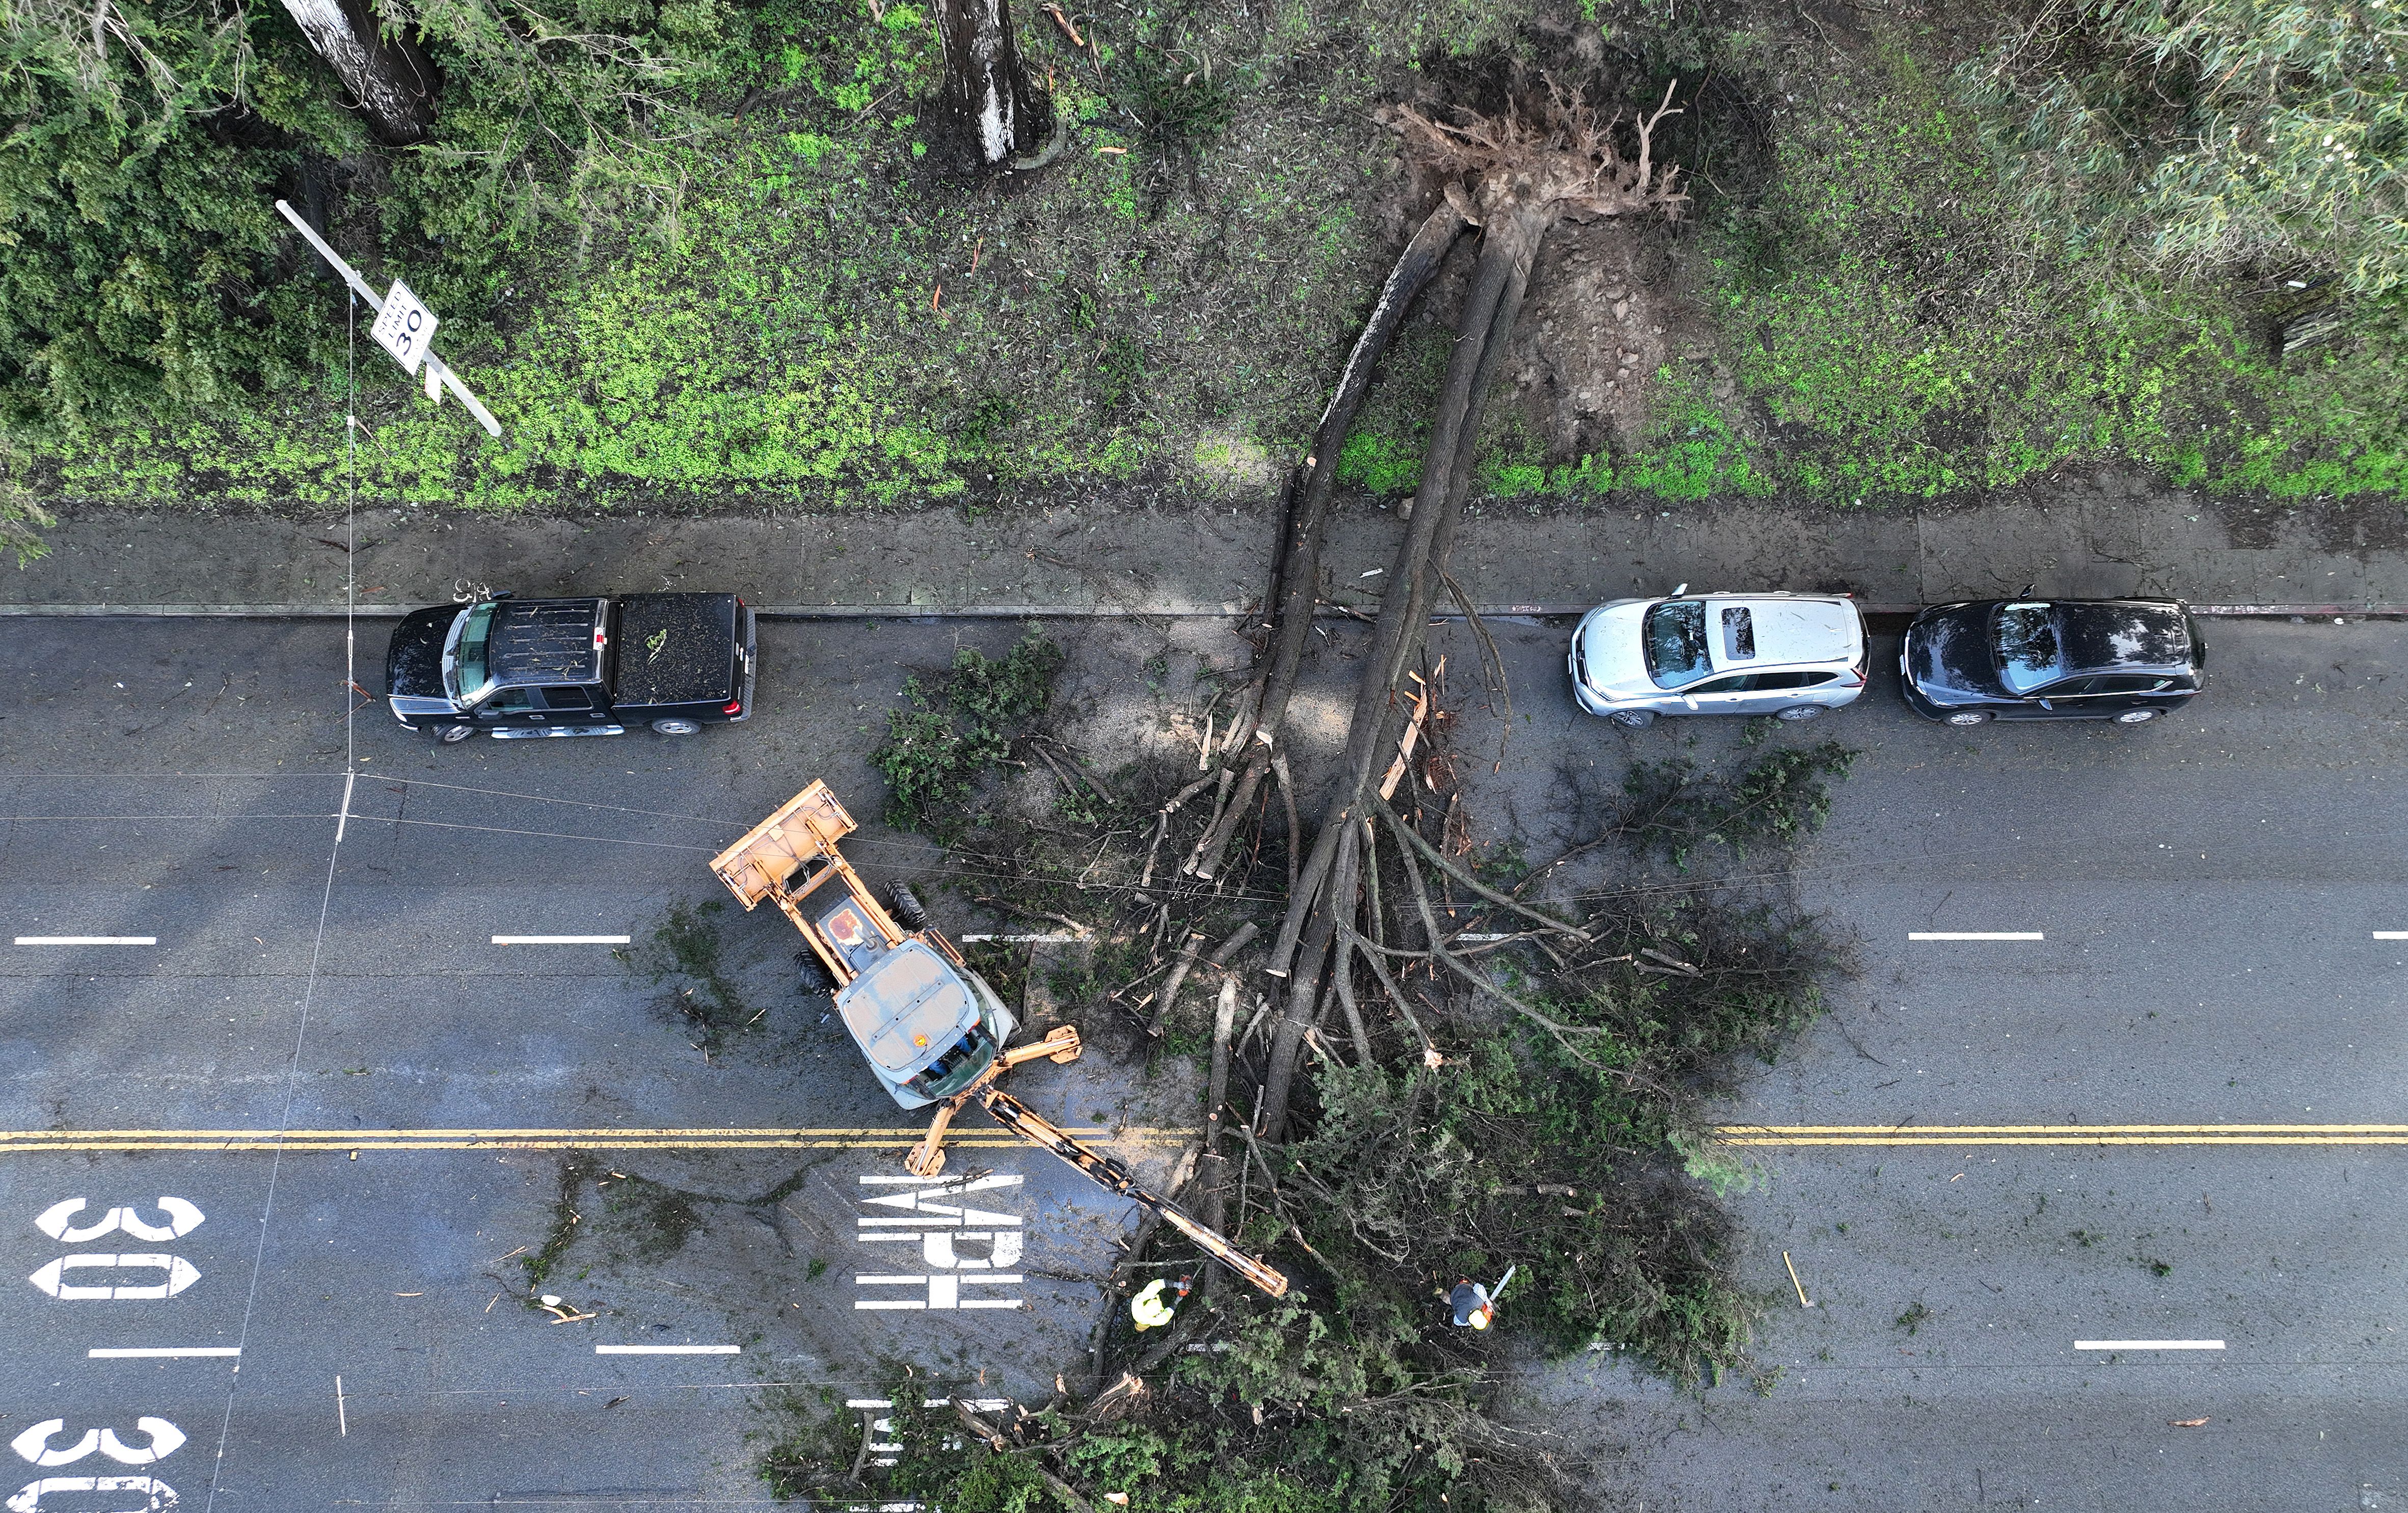 In an aerial view, San Francisco Department of Public Works workers clean up a tree that fell on Fulton Street after a storm passed through the area on January 10, 2023 in San Francisco.